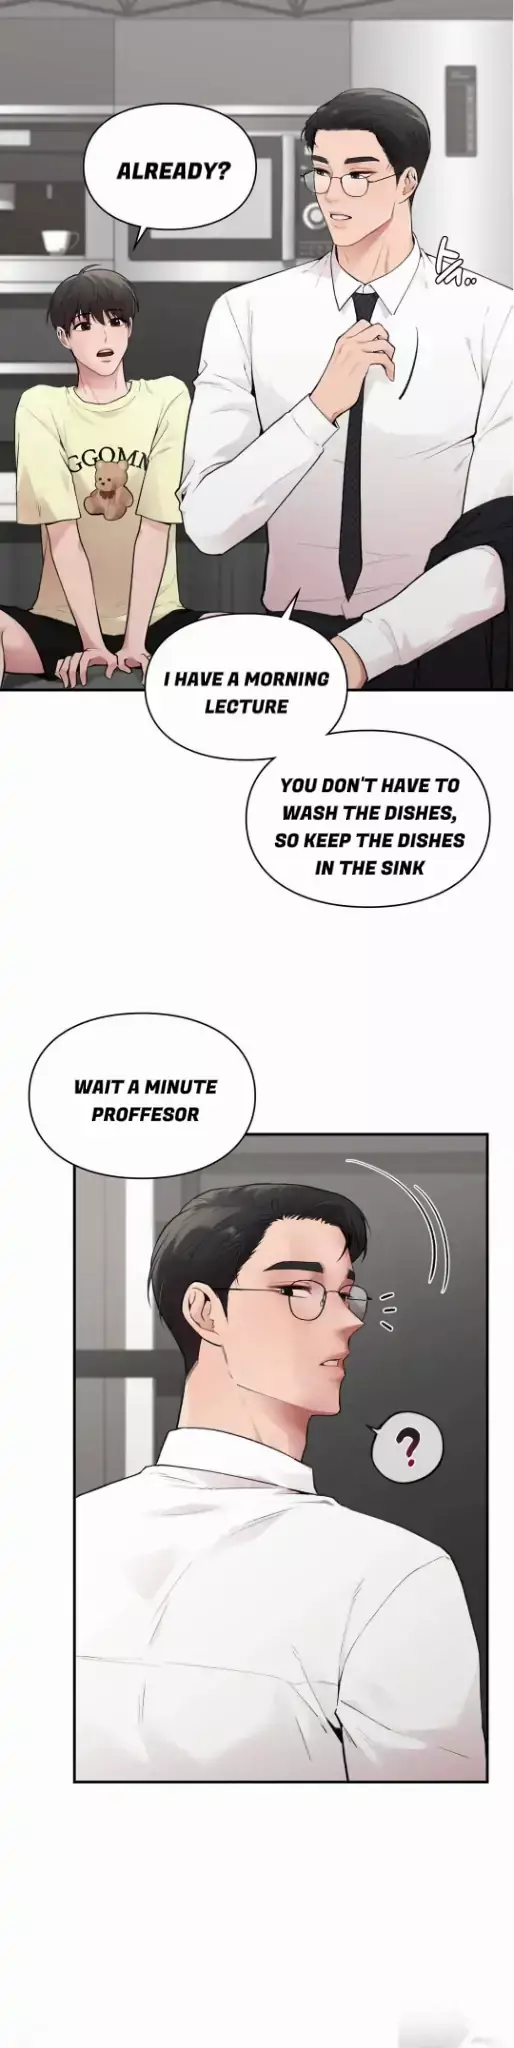 Ideal Type But Kkondae - 7 page 7-8c1c98a0